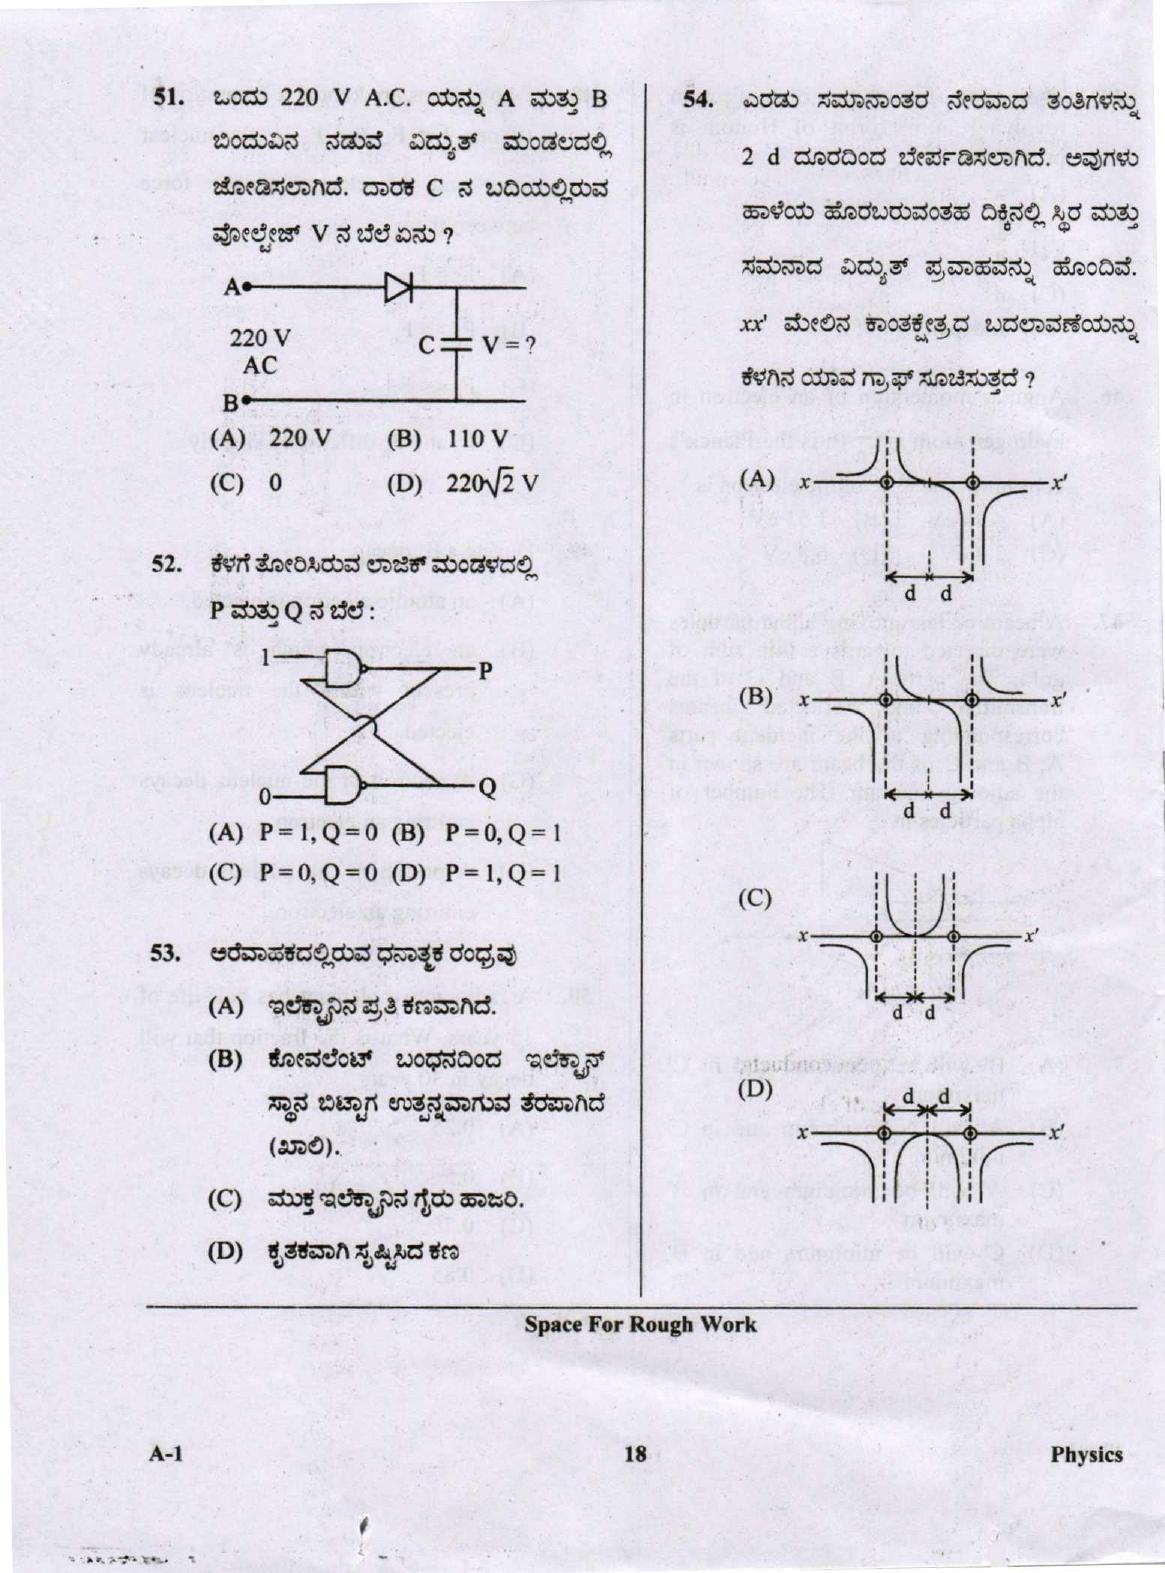 KCET Physics 2020 Question Papers - Page 18